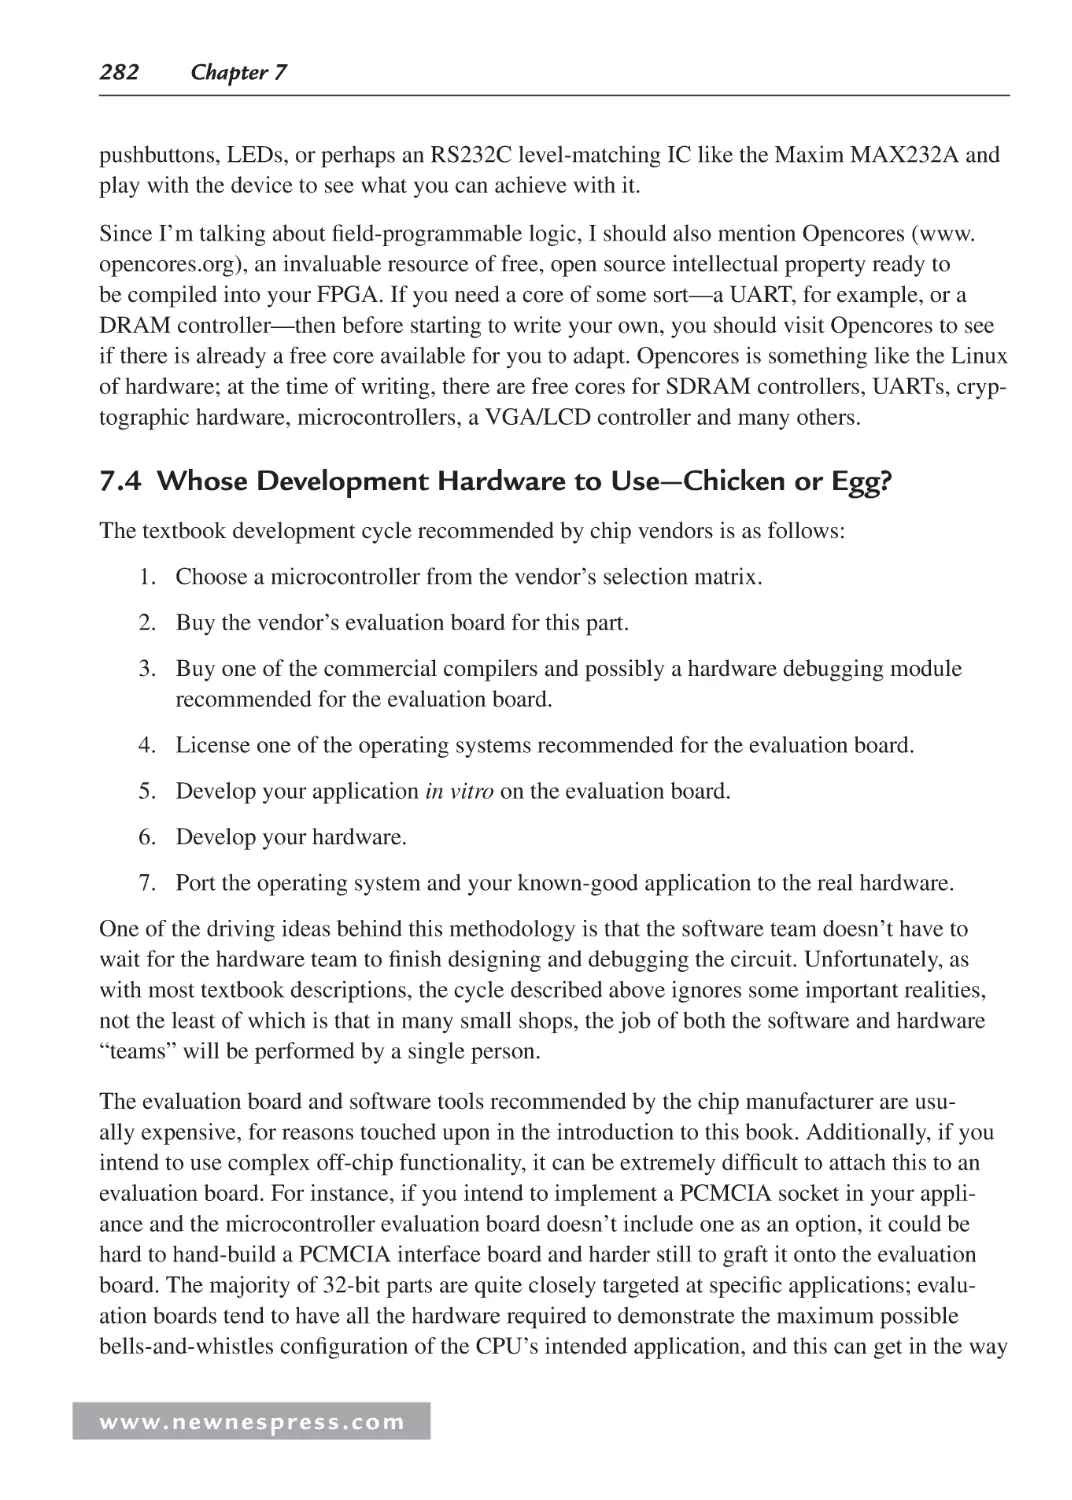 7.4 Whose Development Hardware to Use—Chicken or Egg?